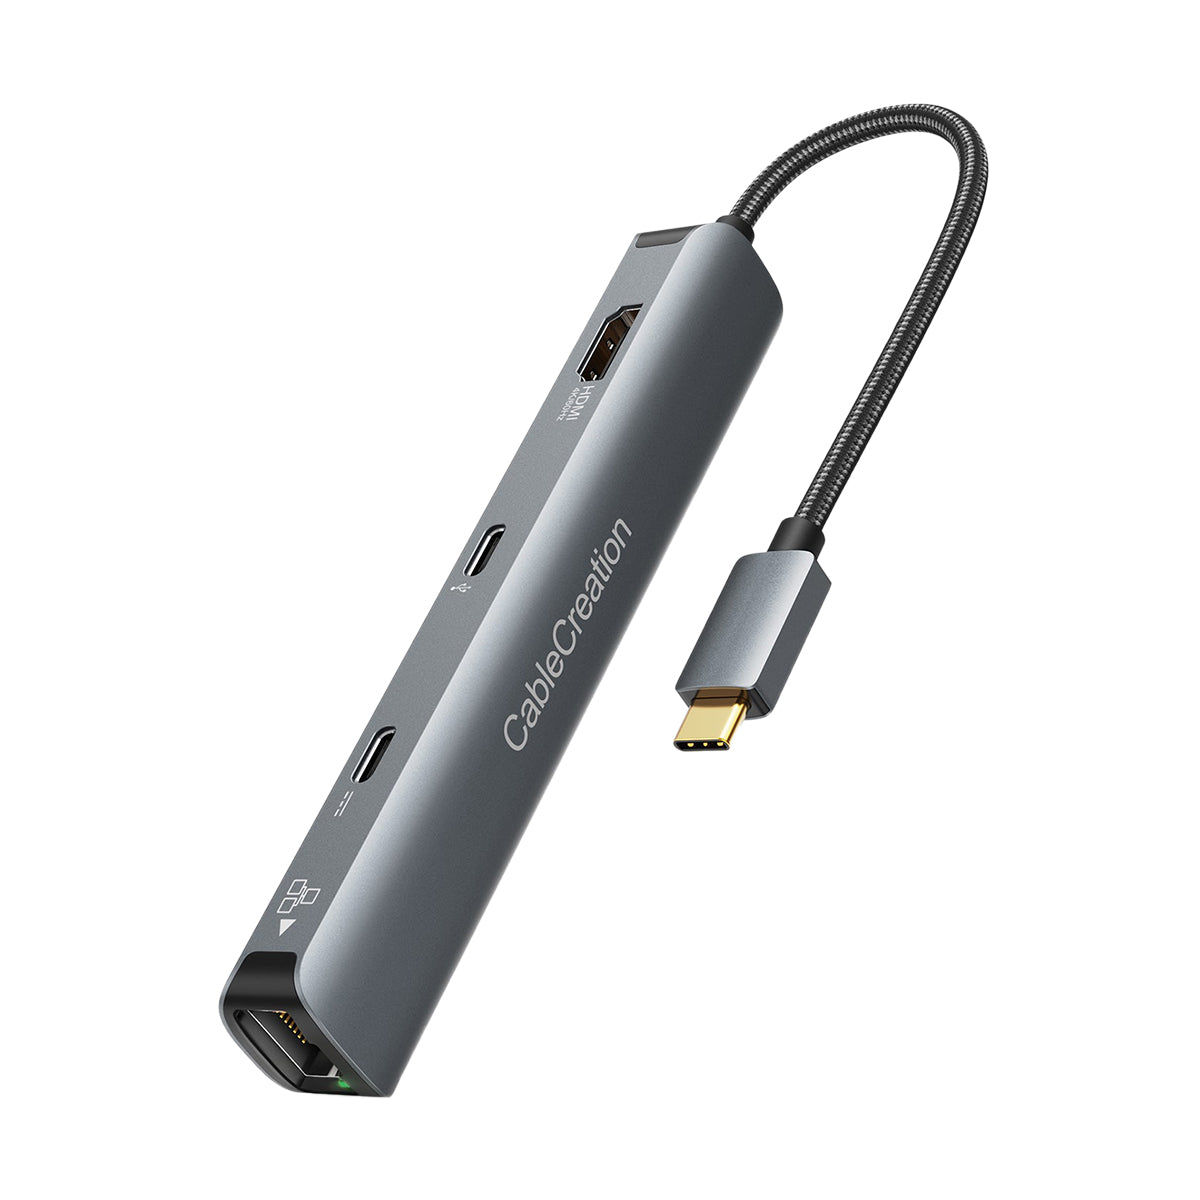 USB-C to Dual Gigabit Ethernet Adapter with USB 3.0 (Type-A) Port, USB  Type-C Gigabit Network Adapter